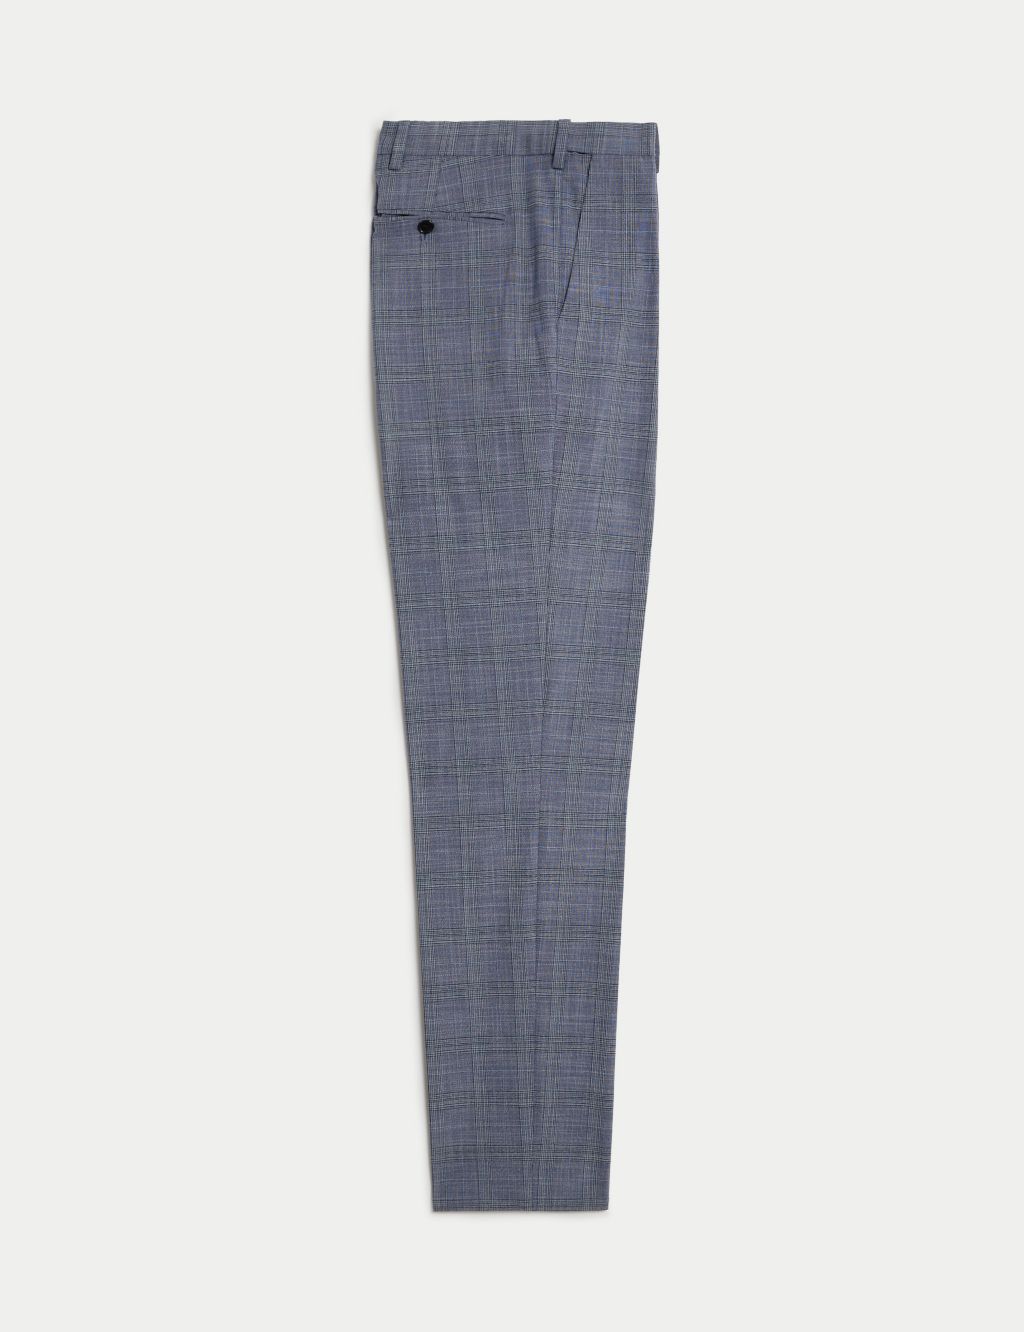 Single Pleat Checked Stretch Trousers image 2